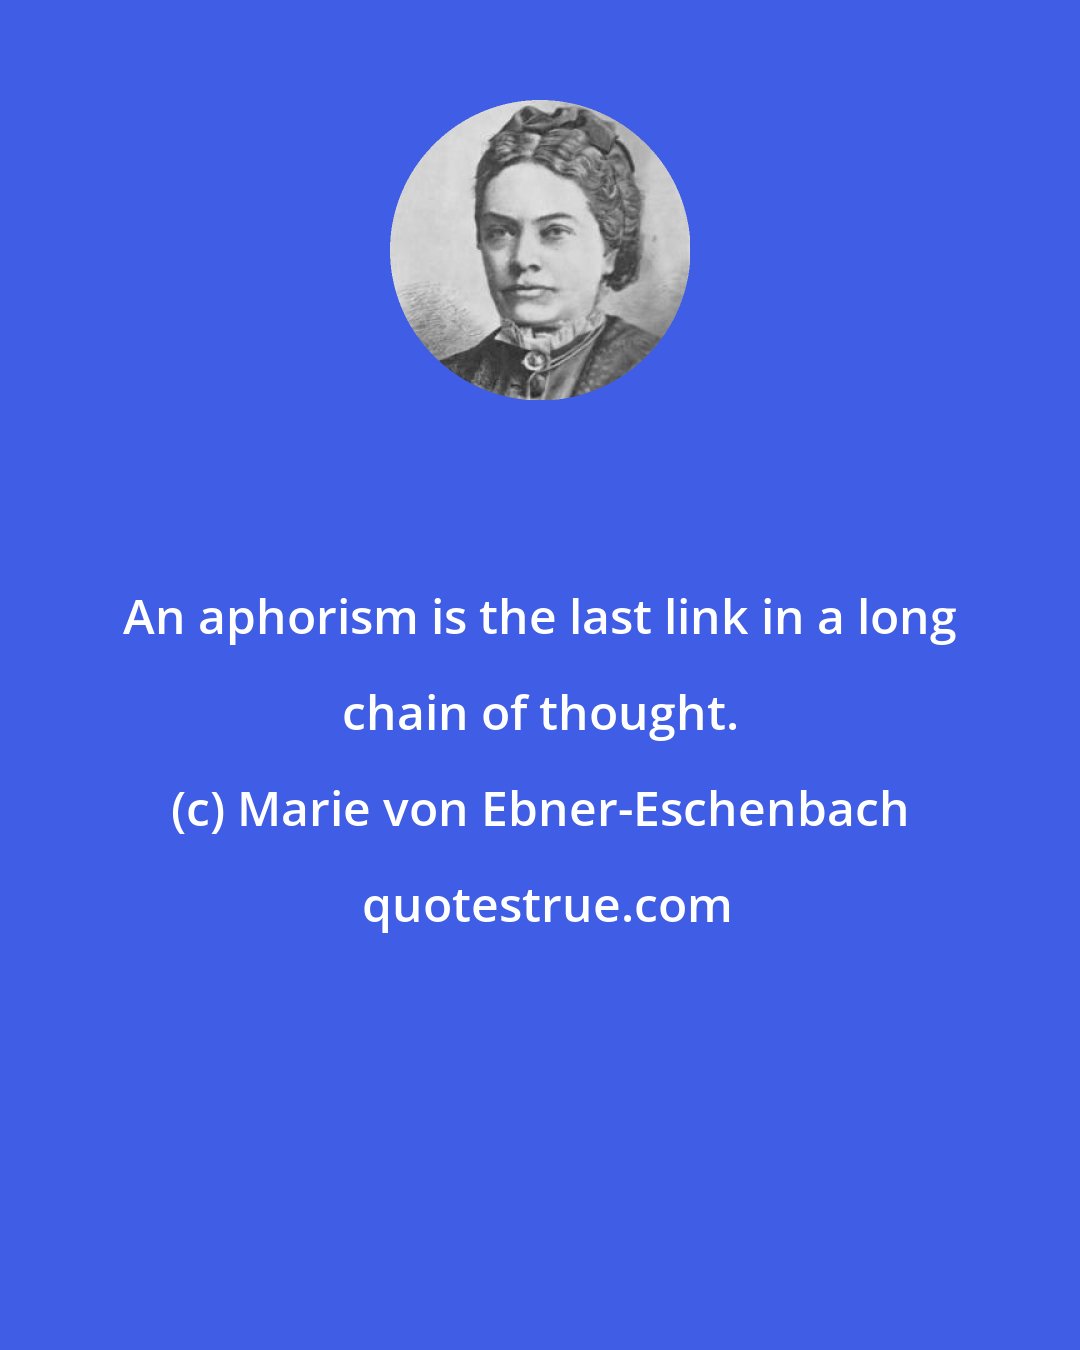 Marie von Ebner-Eschenbach: An aphorism is the last link in a long chain of thought.